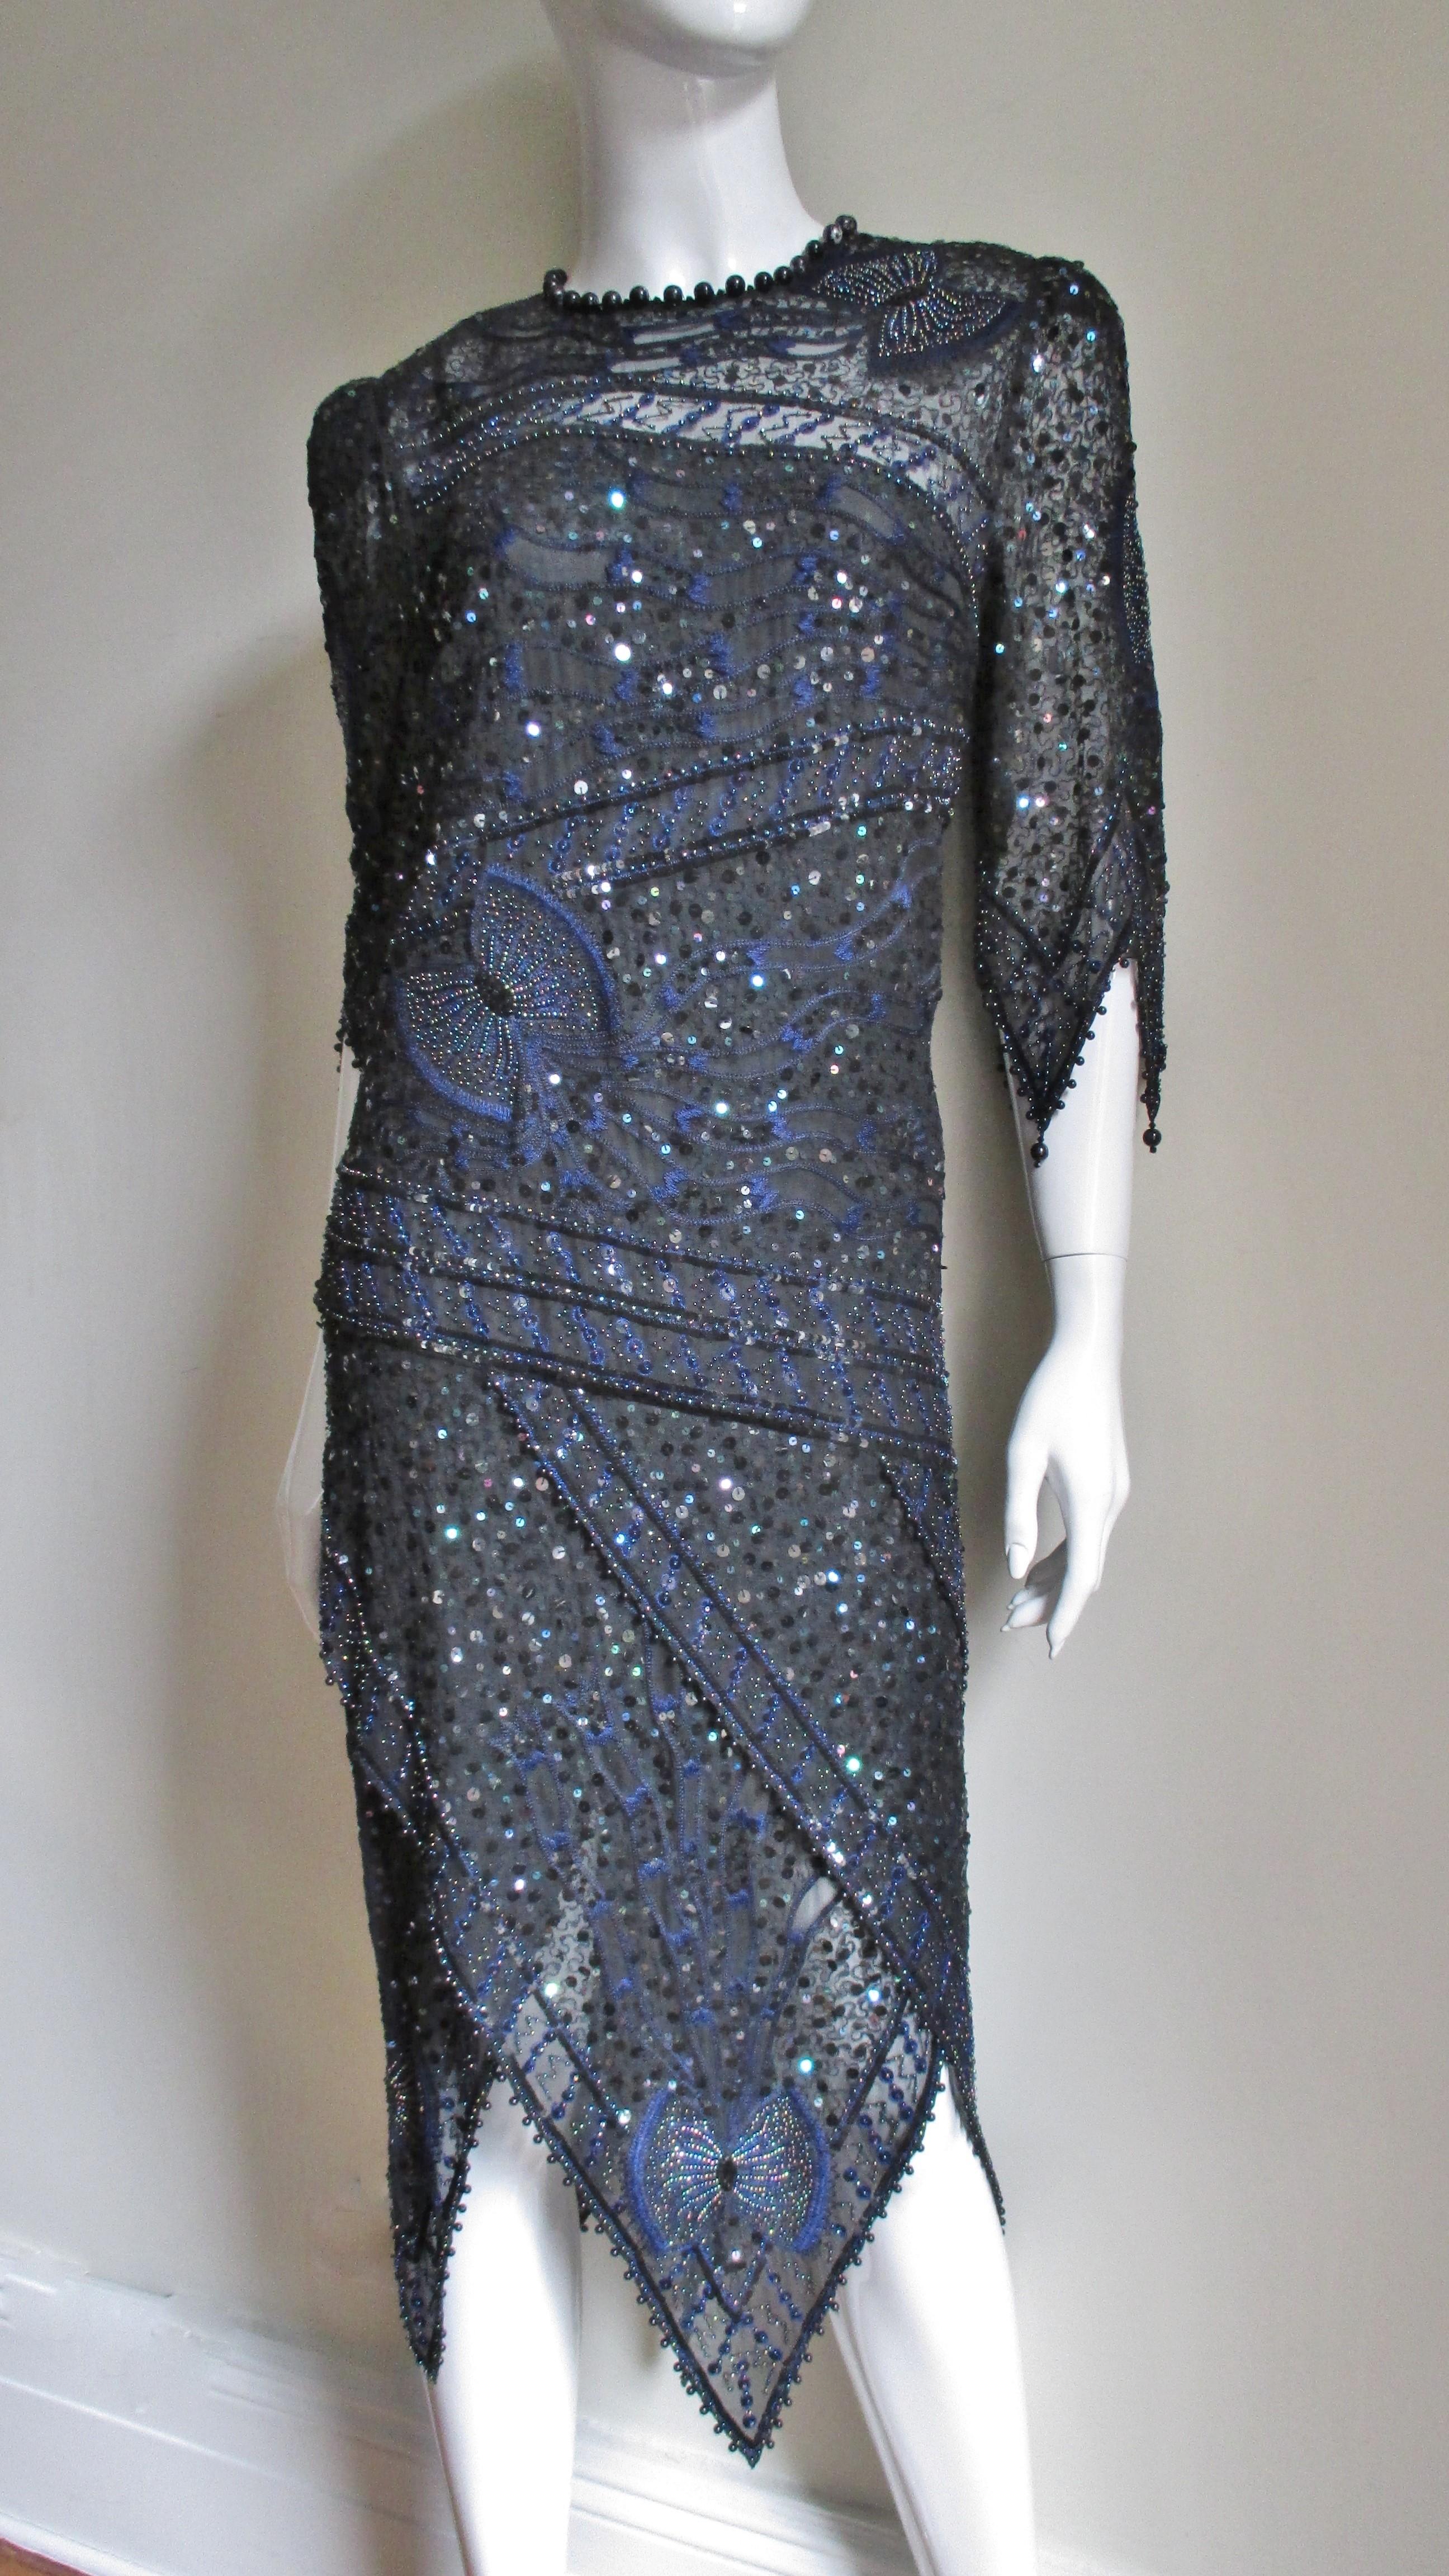 A gorgeous bead, sequin and blue embroidery dress from Zandra Rhodes made of semi sheer black silk. There are intricately beaded butterflies sprinkled throughout and bands that cross the dress on an angles front and back.  It has elbow length